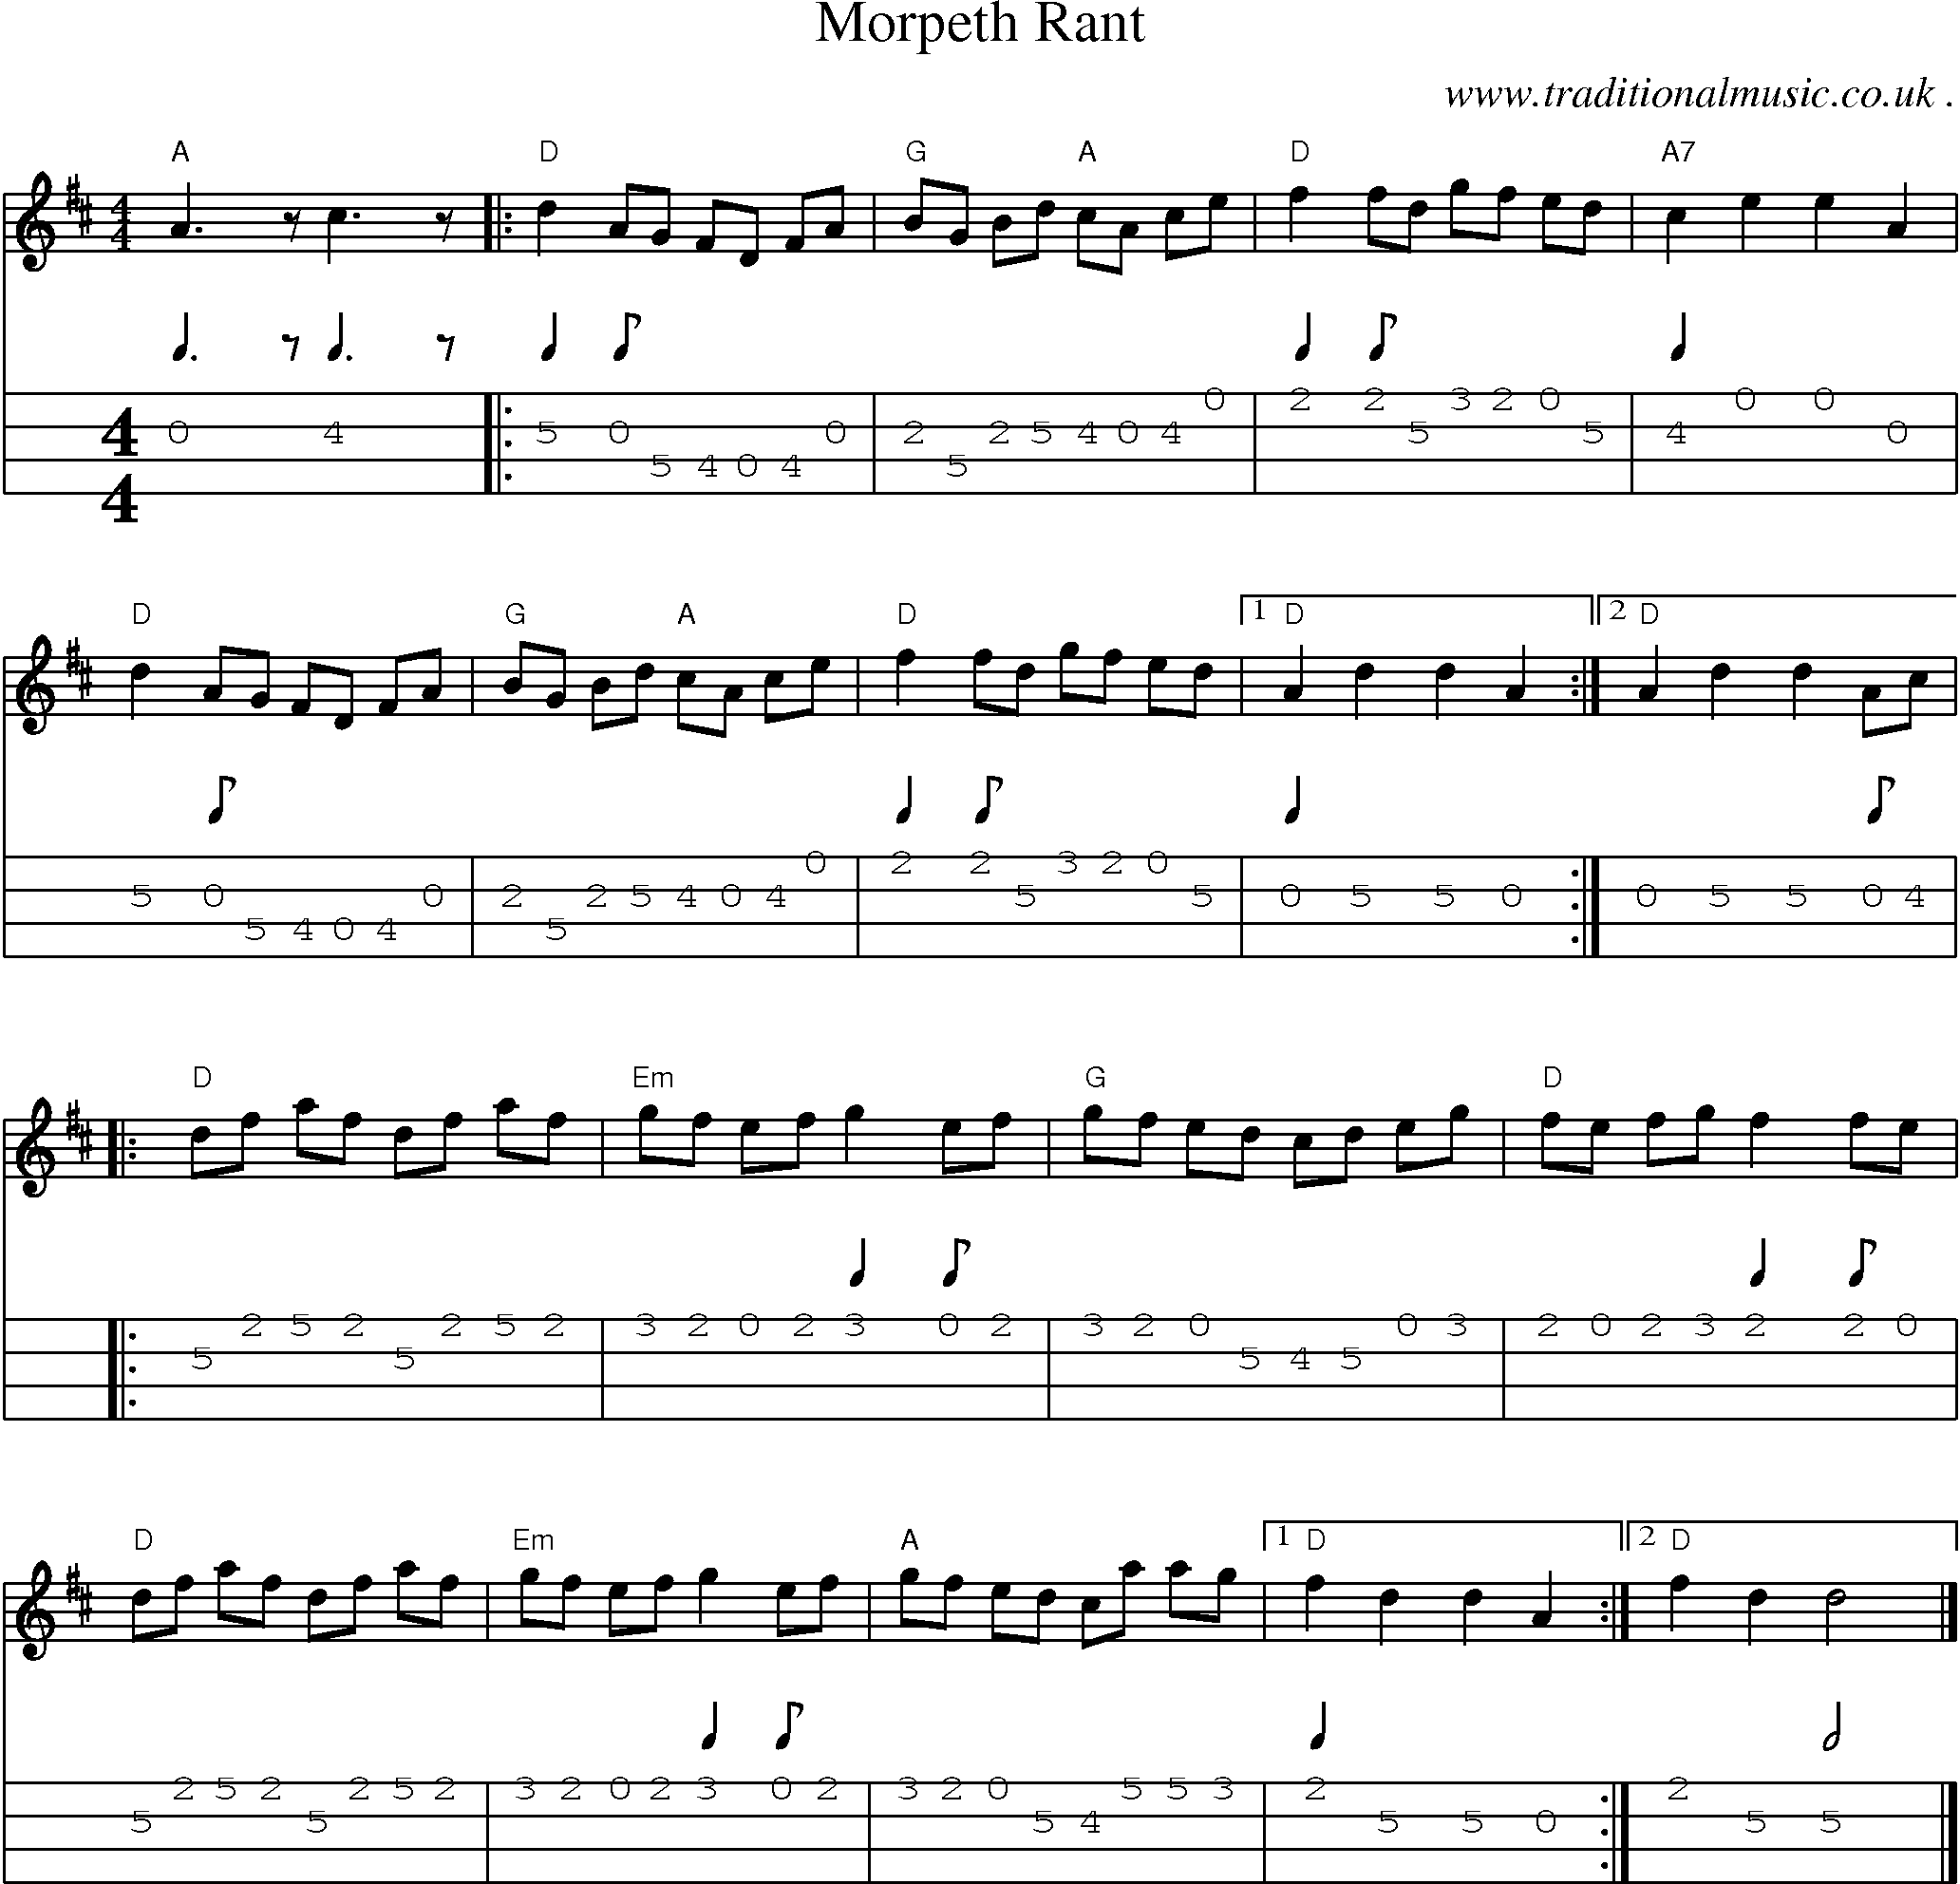 Music Score and Guitar Tabs for Morpeth Rant